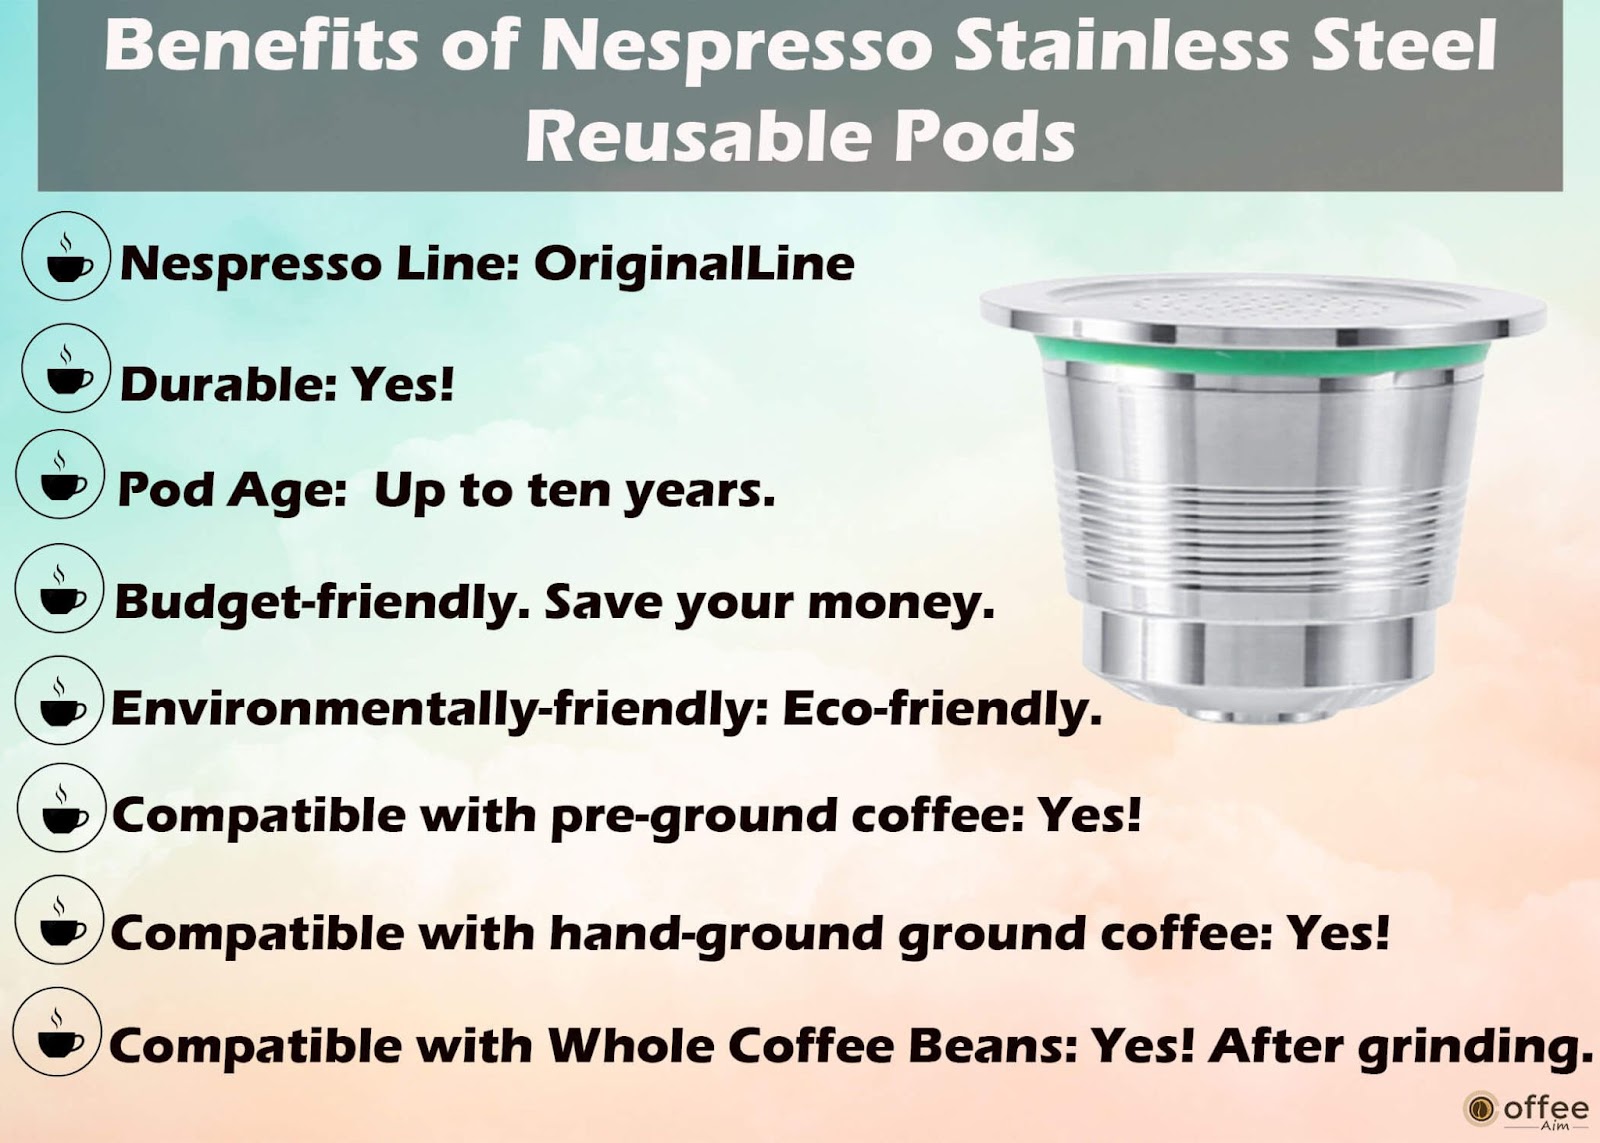 Benefits of Nespresso stainless steel reusable pods